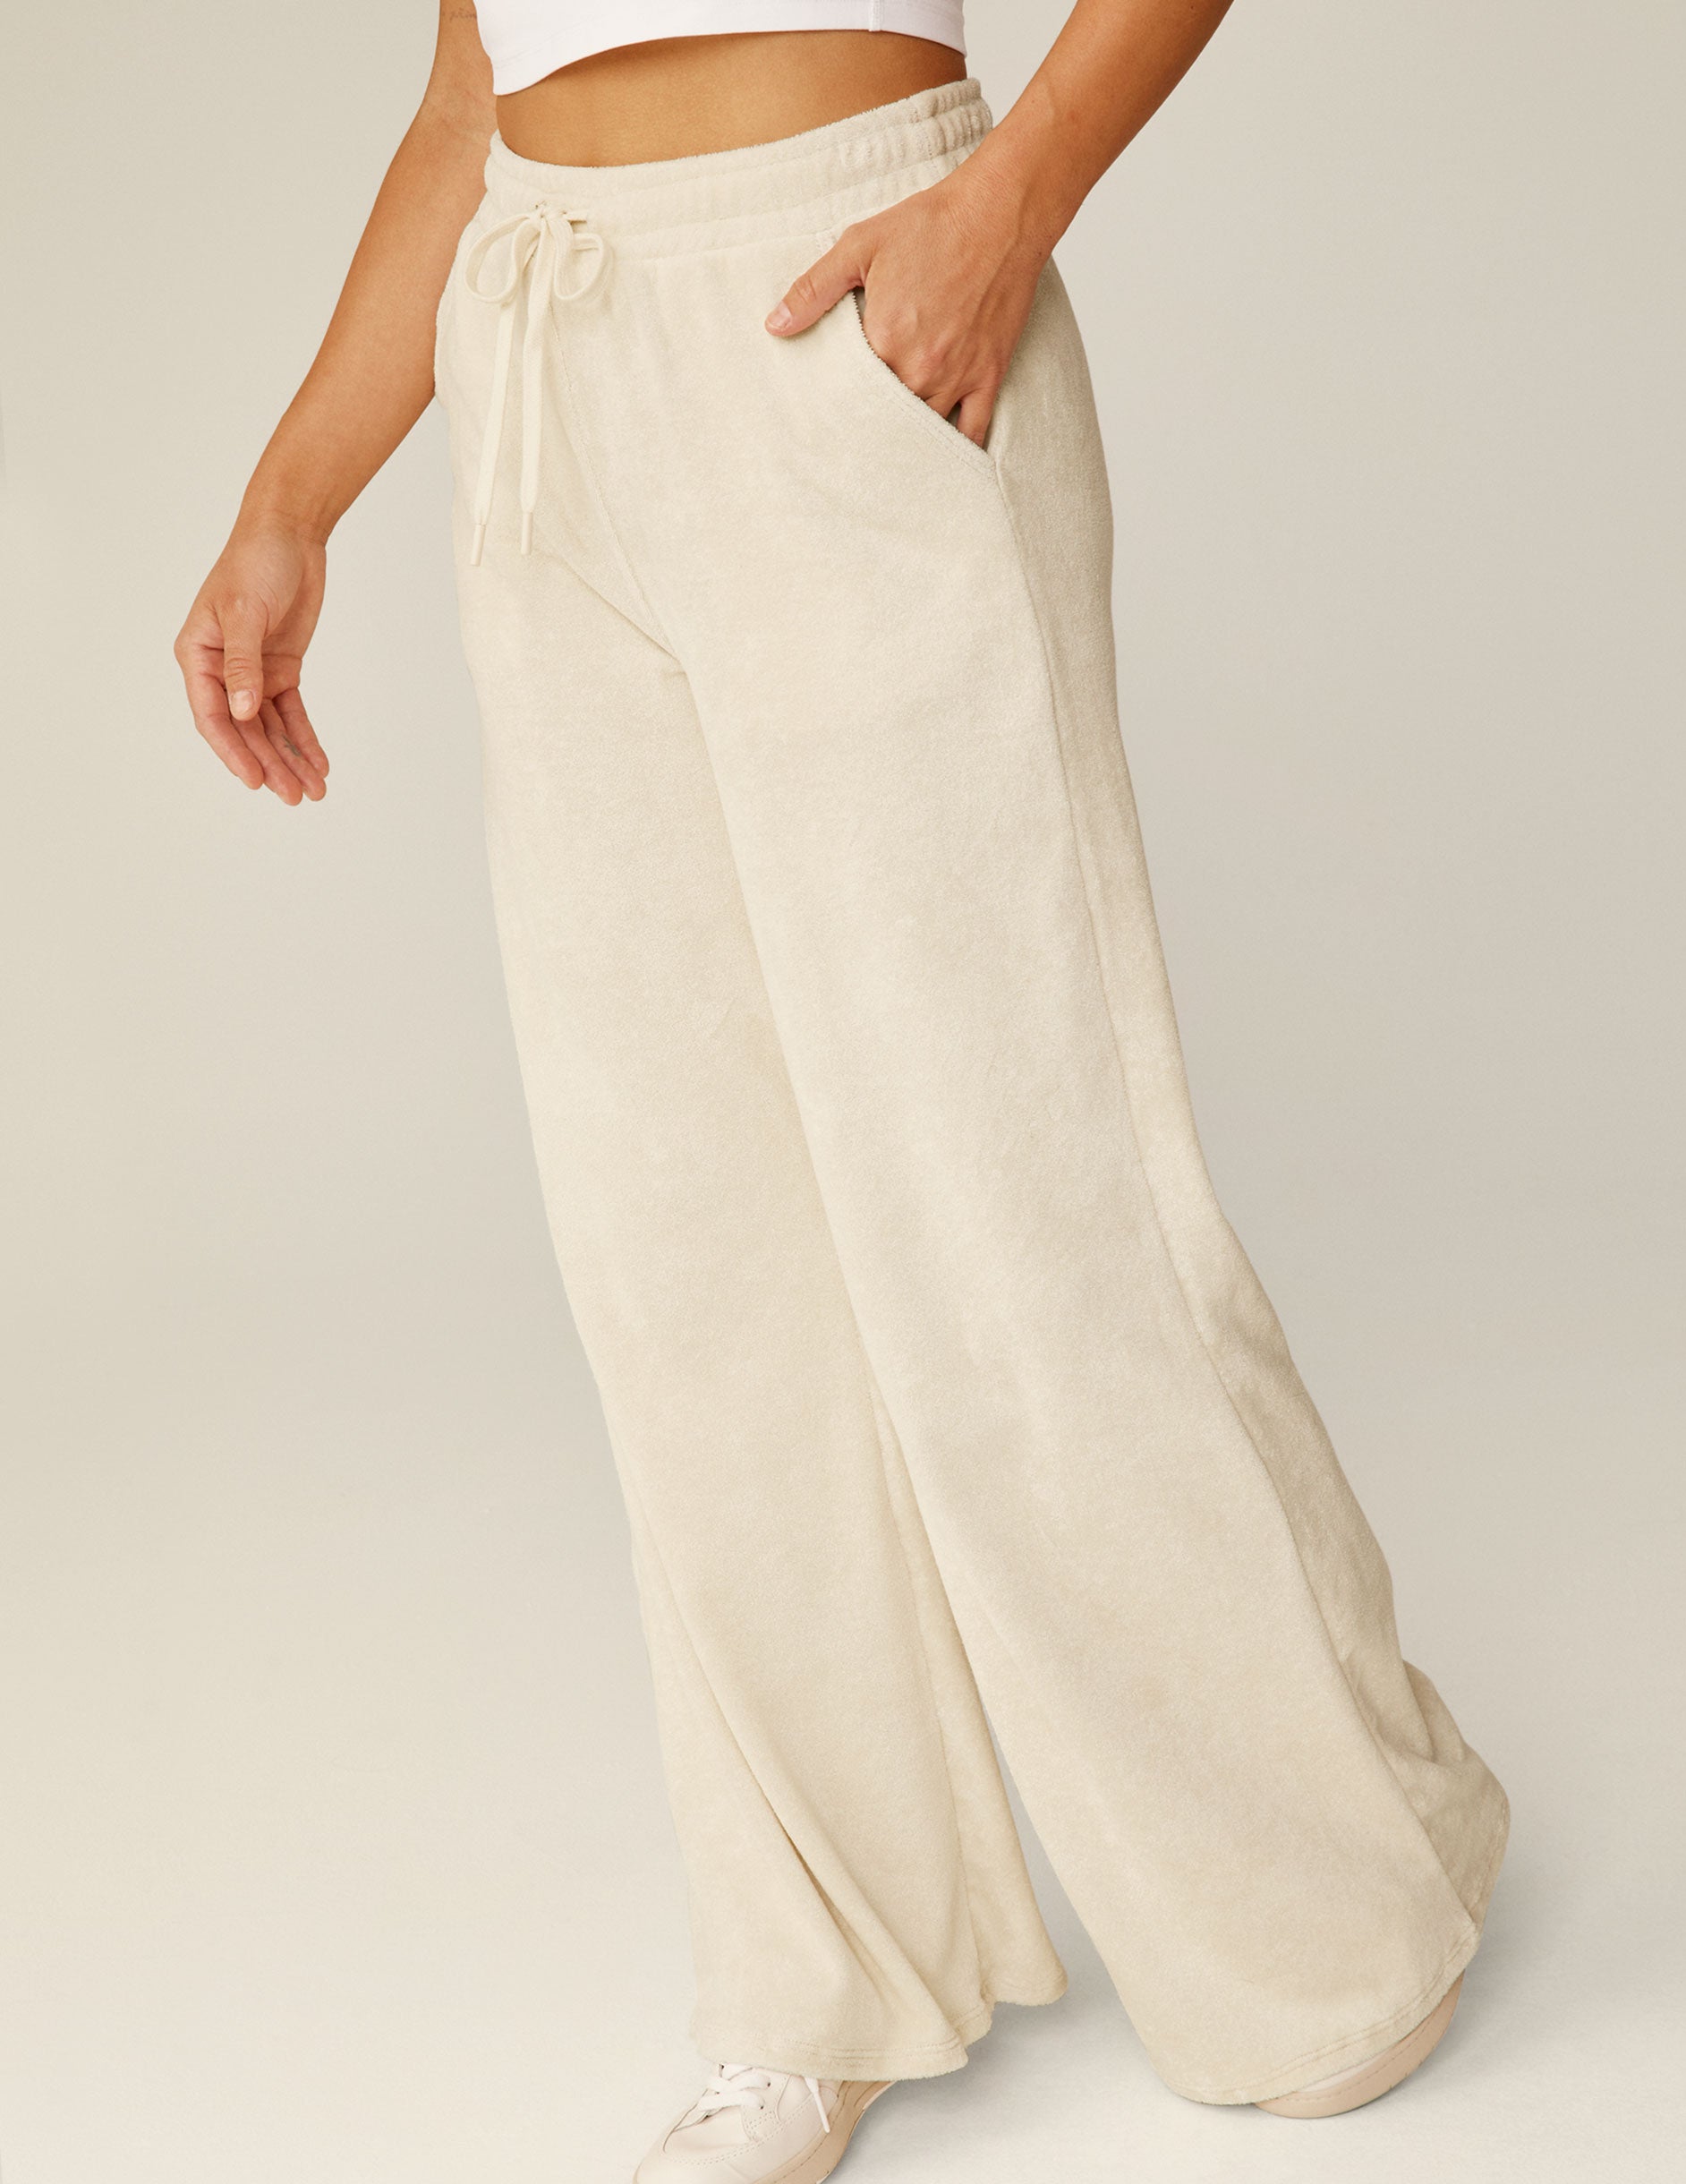 white terry fabric wide leg pants with a drawstring at the waistband.